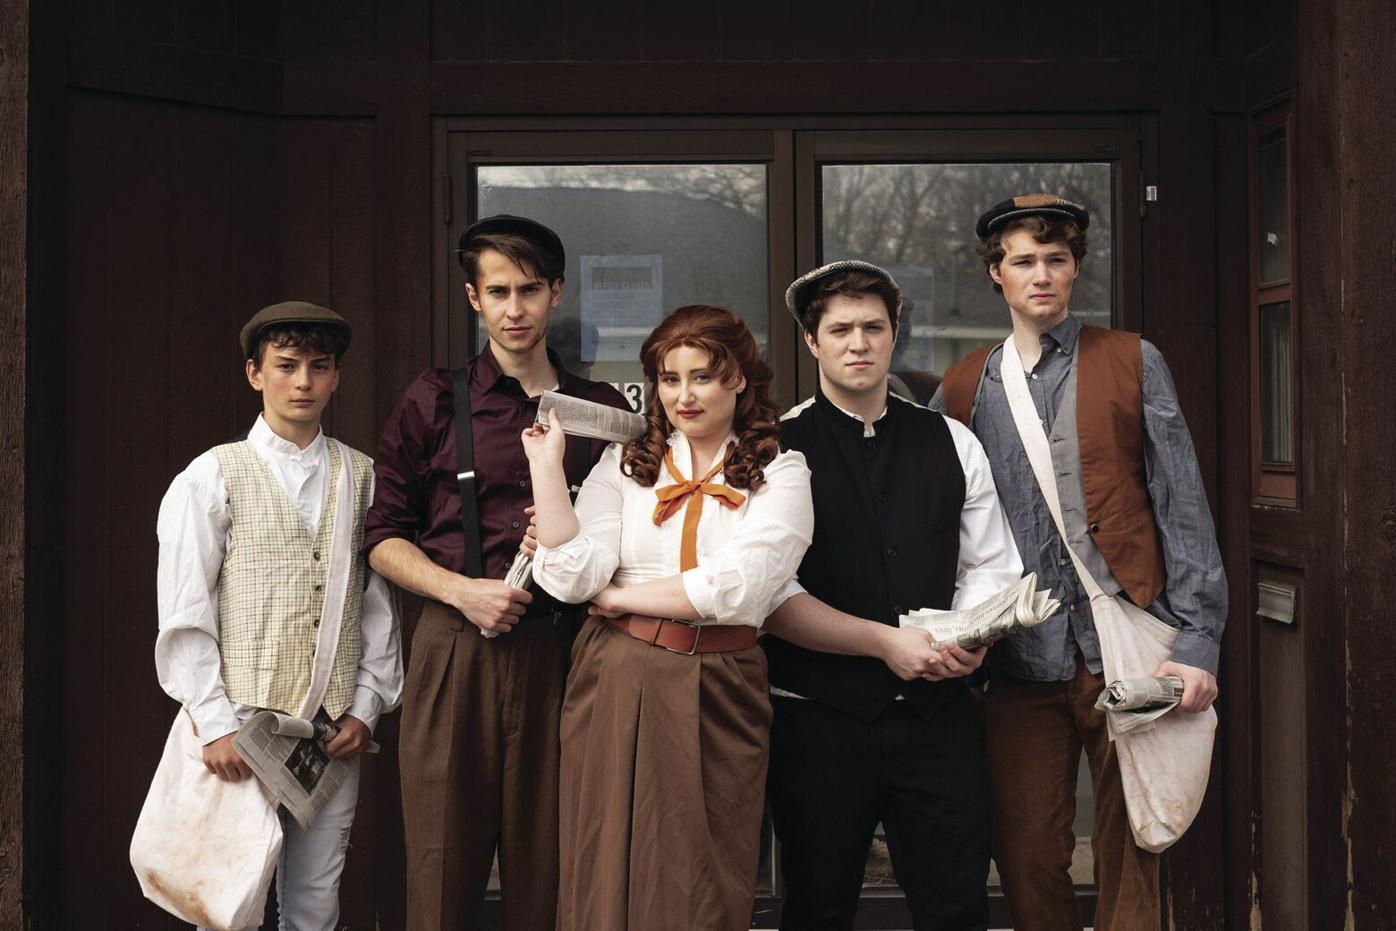 Free Performances Of Newsies The Musical In Dayton Free Hometownsource Com